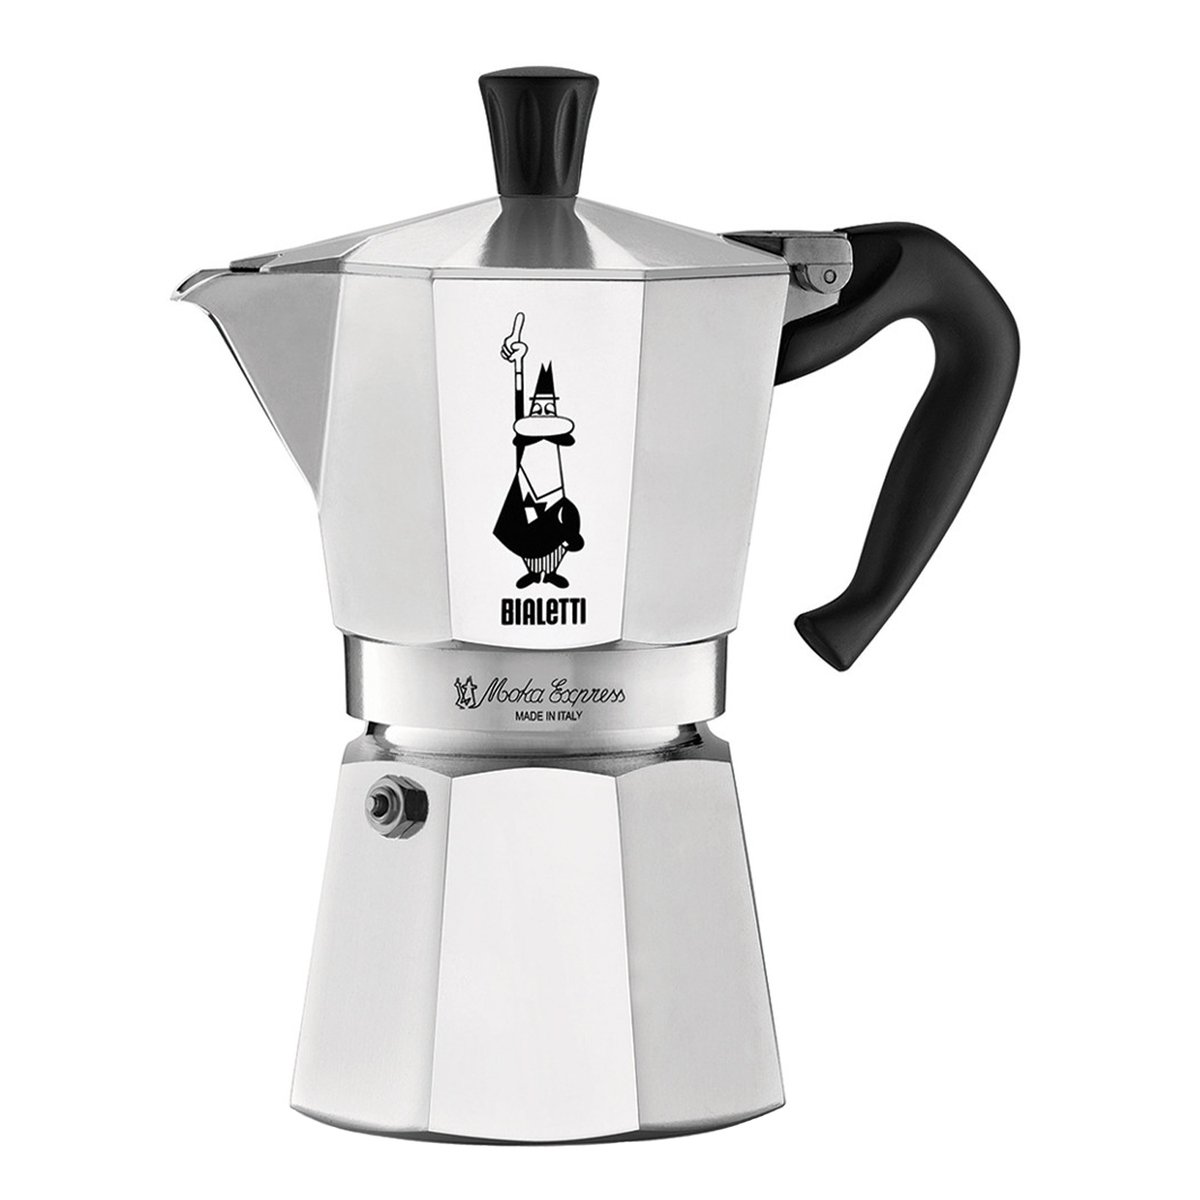 Bialetti Induction Stovetop Espresso Maker Gift Set - Two Chimps Coffee